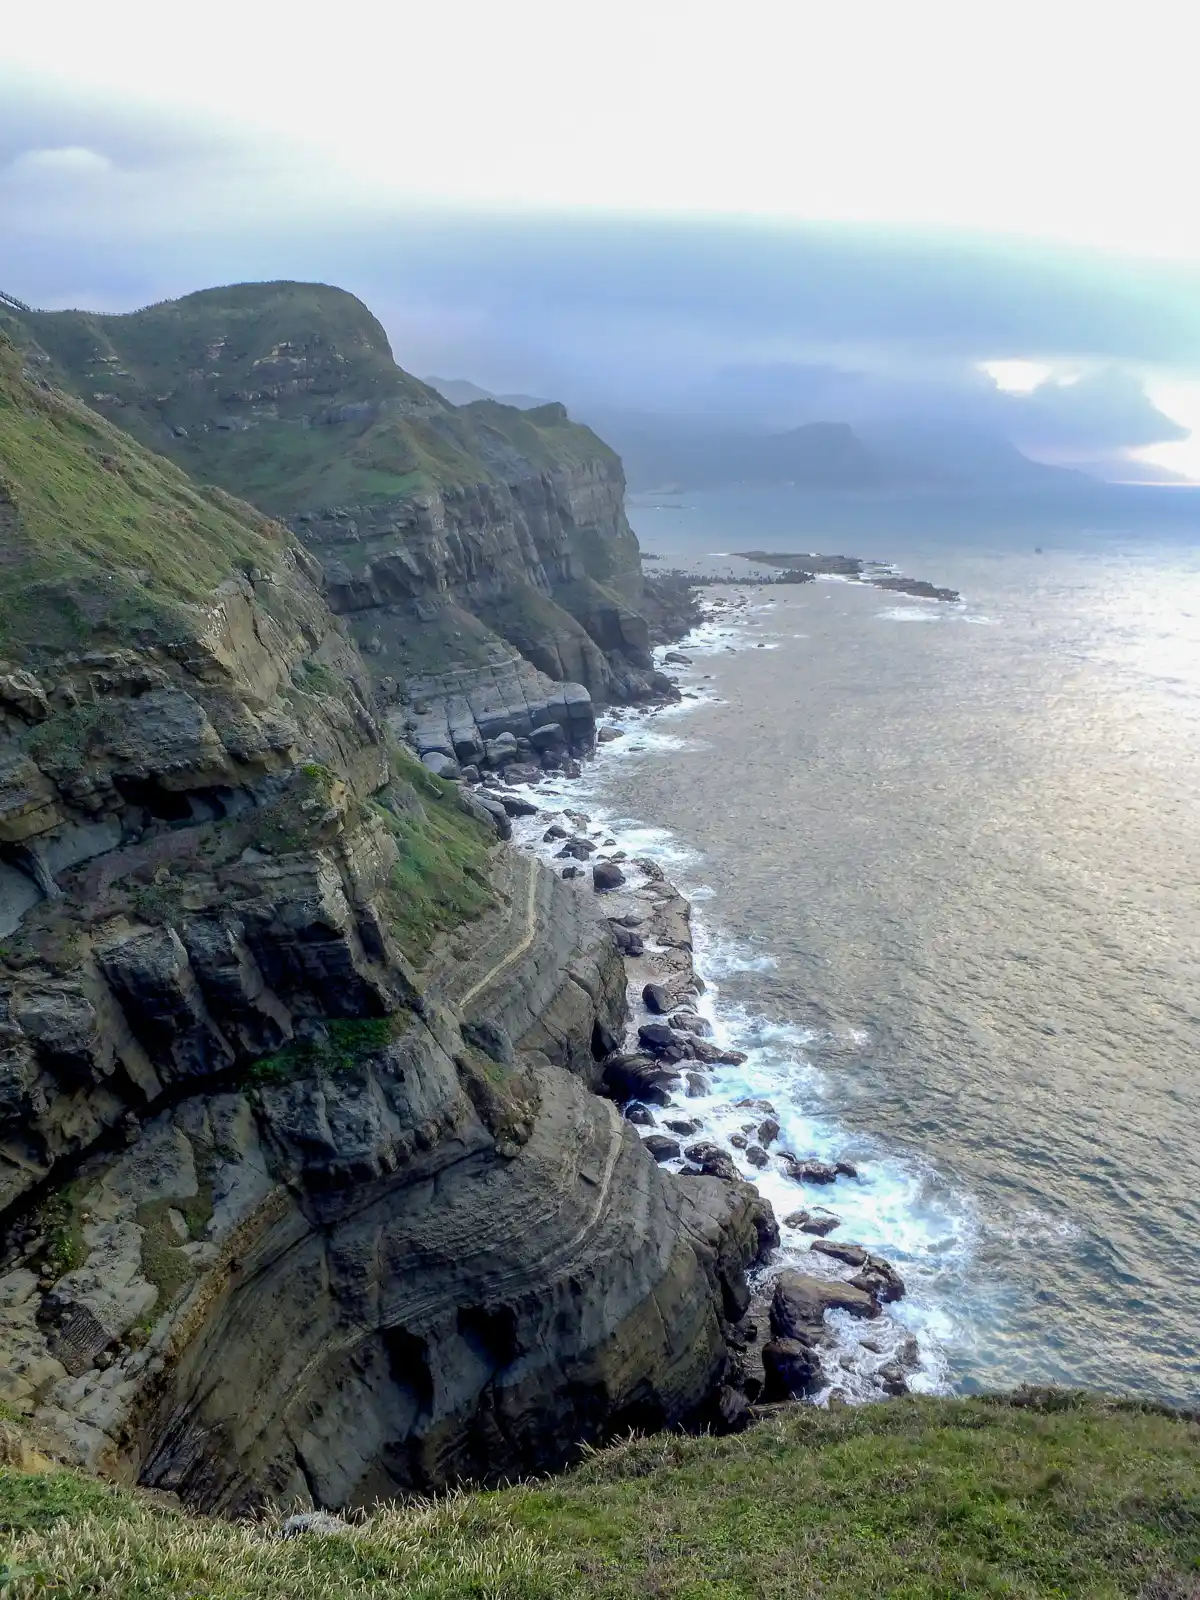 A view of the massive cliffs of the Bitou Cape.